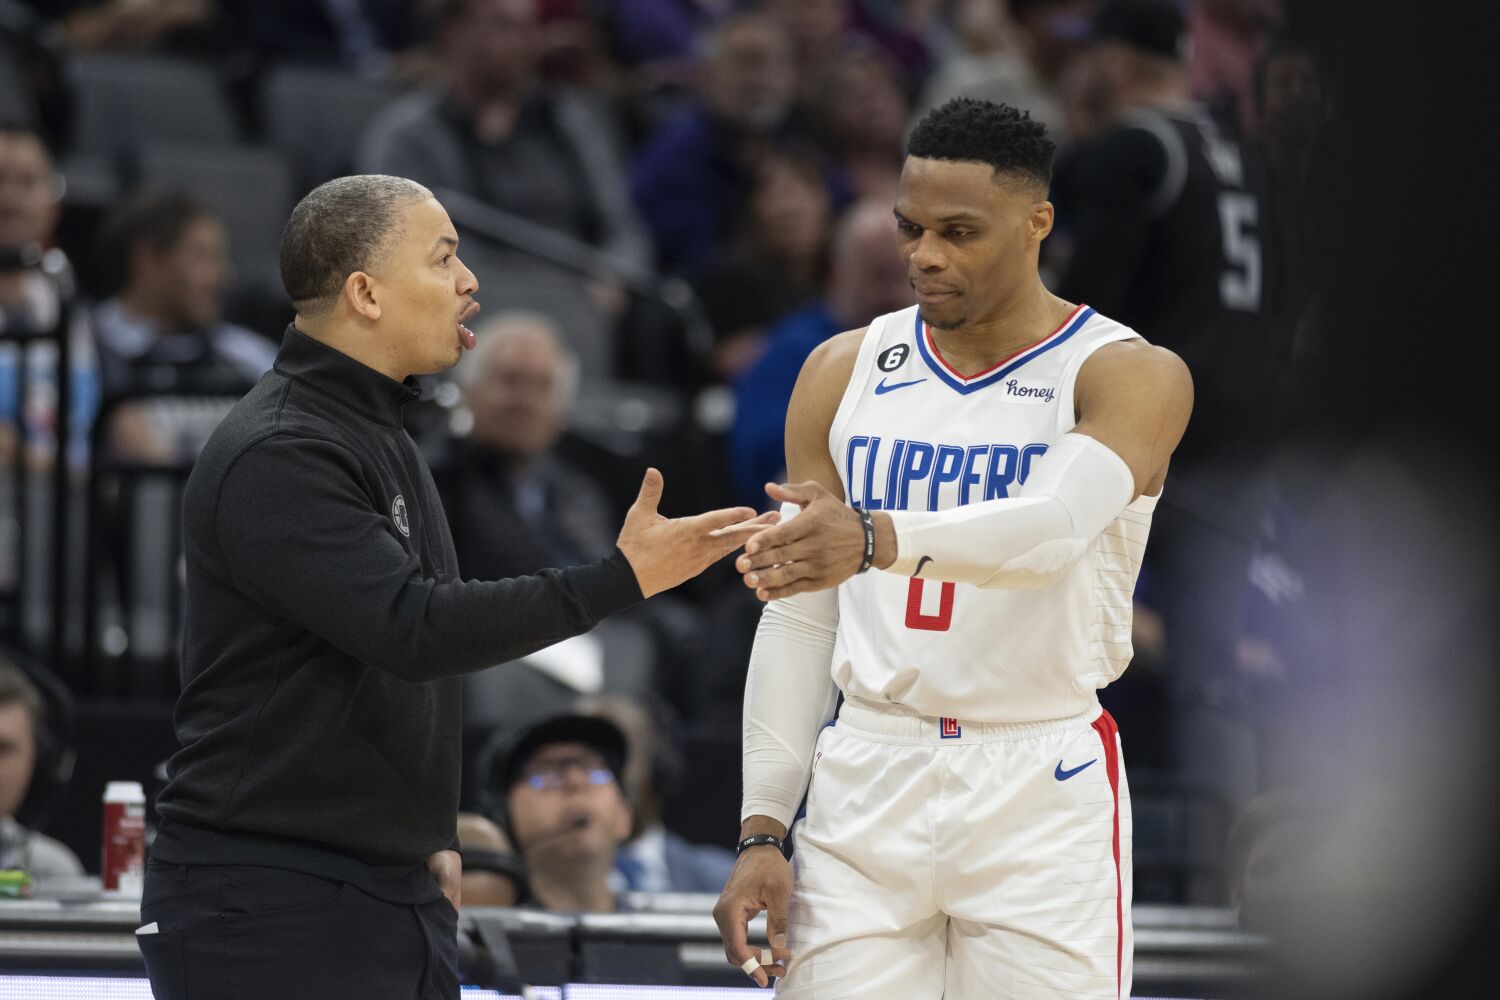 With Marcus Morris sidelined, Clippers look to stabilize lineup and rotations